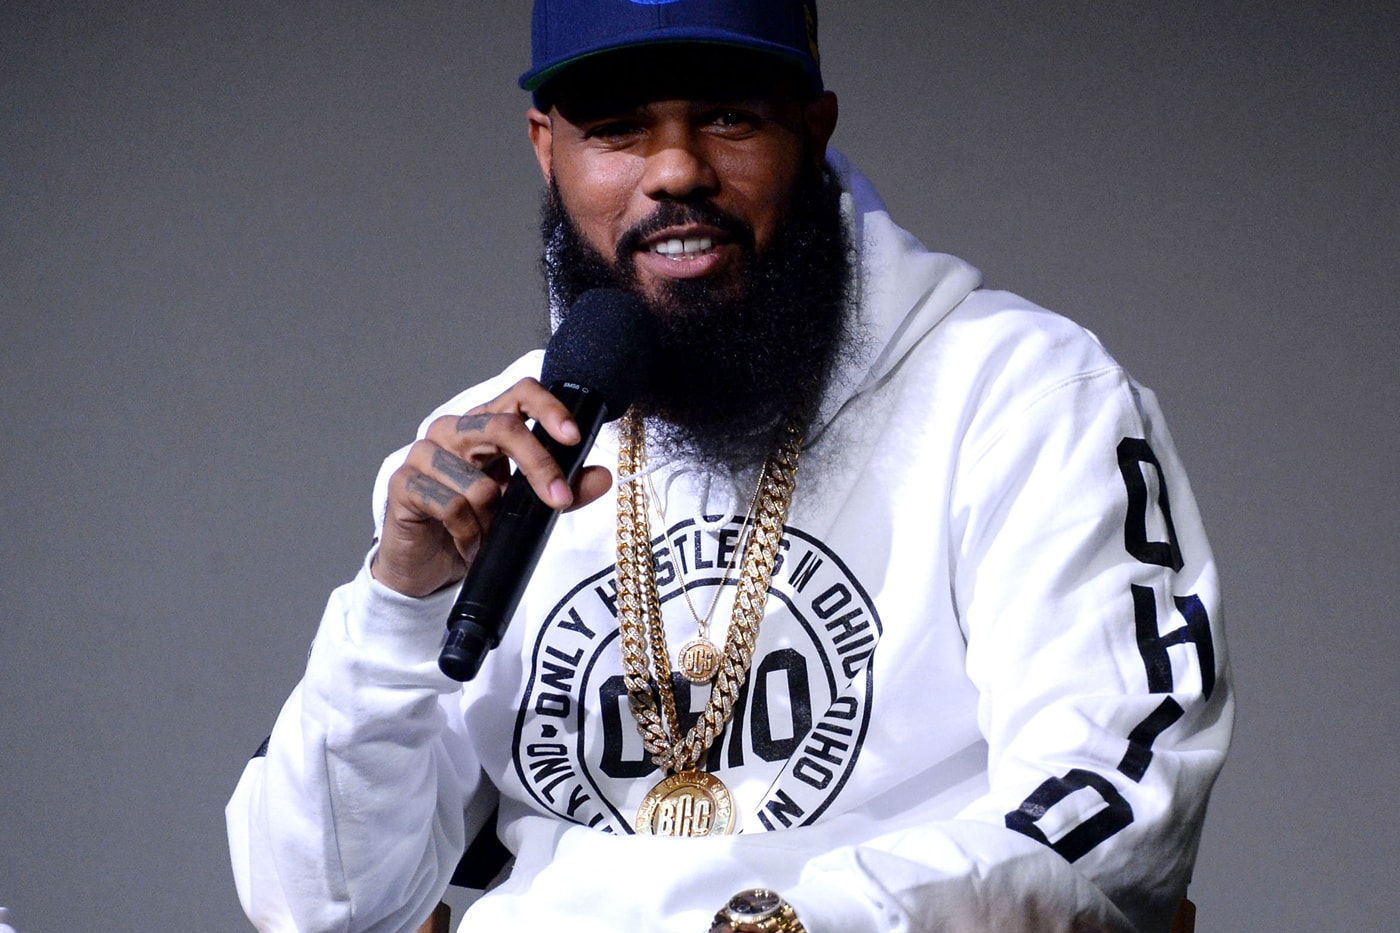 stalley-harsh-ave-produced-by-ski-beatz